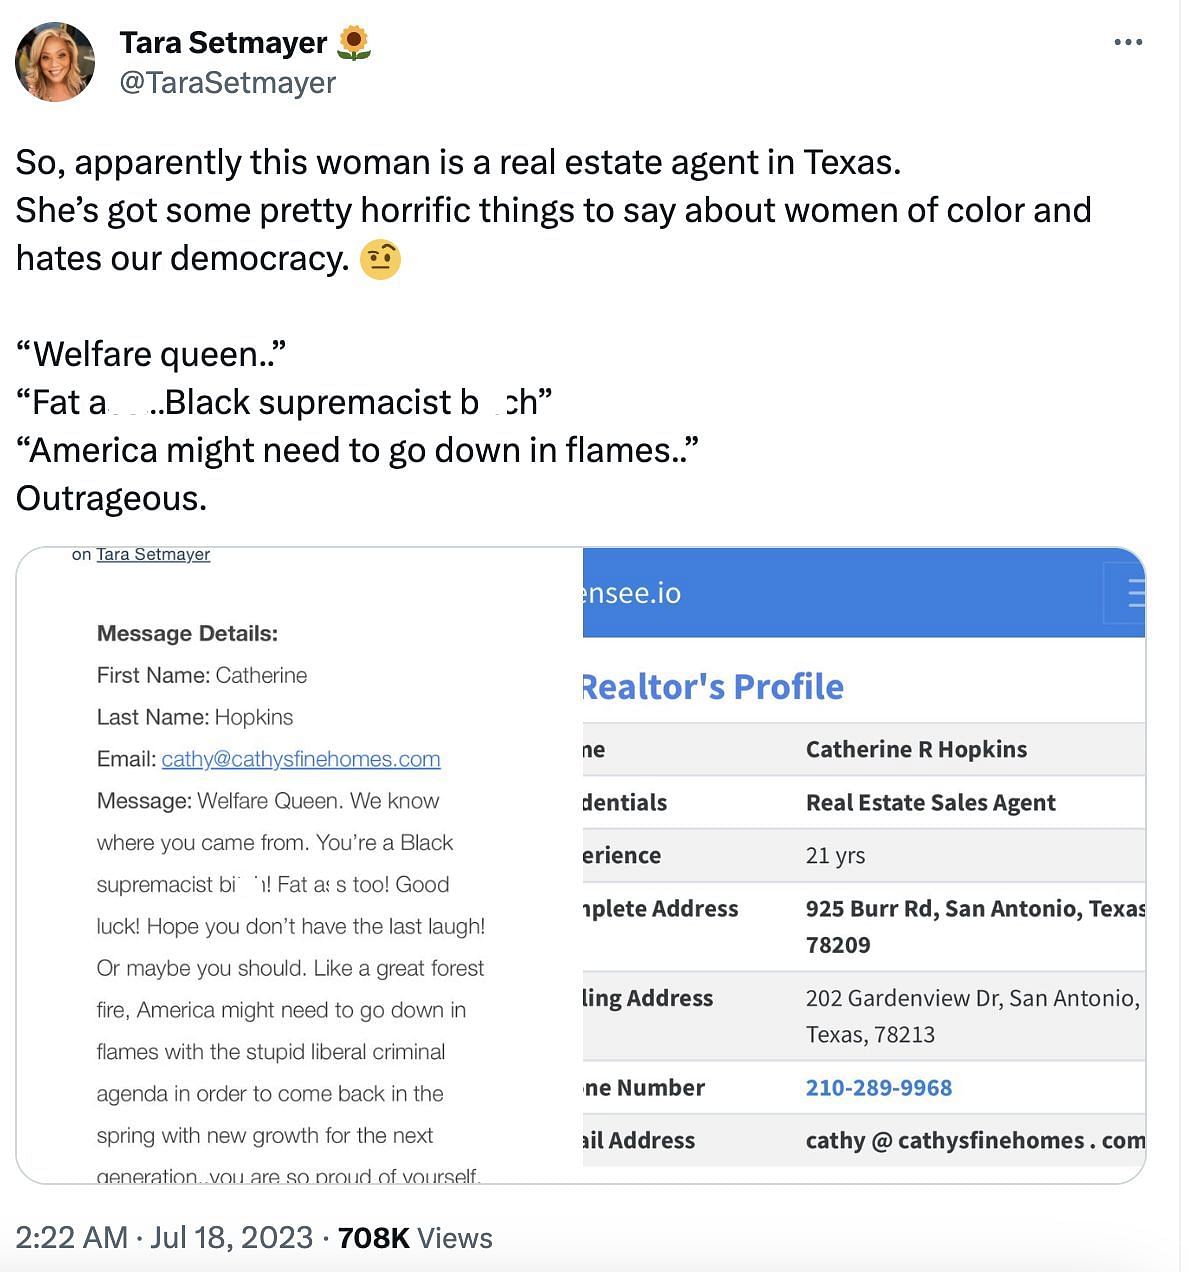 Social media users were left outraged after many discovered the racist email sent out by the real estate agent. (Image via Twitter)